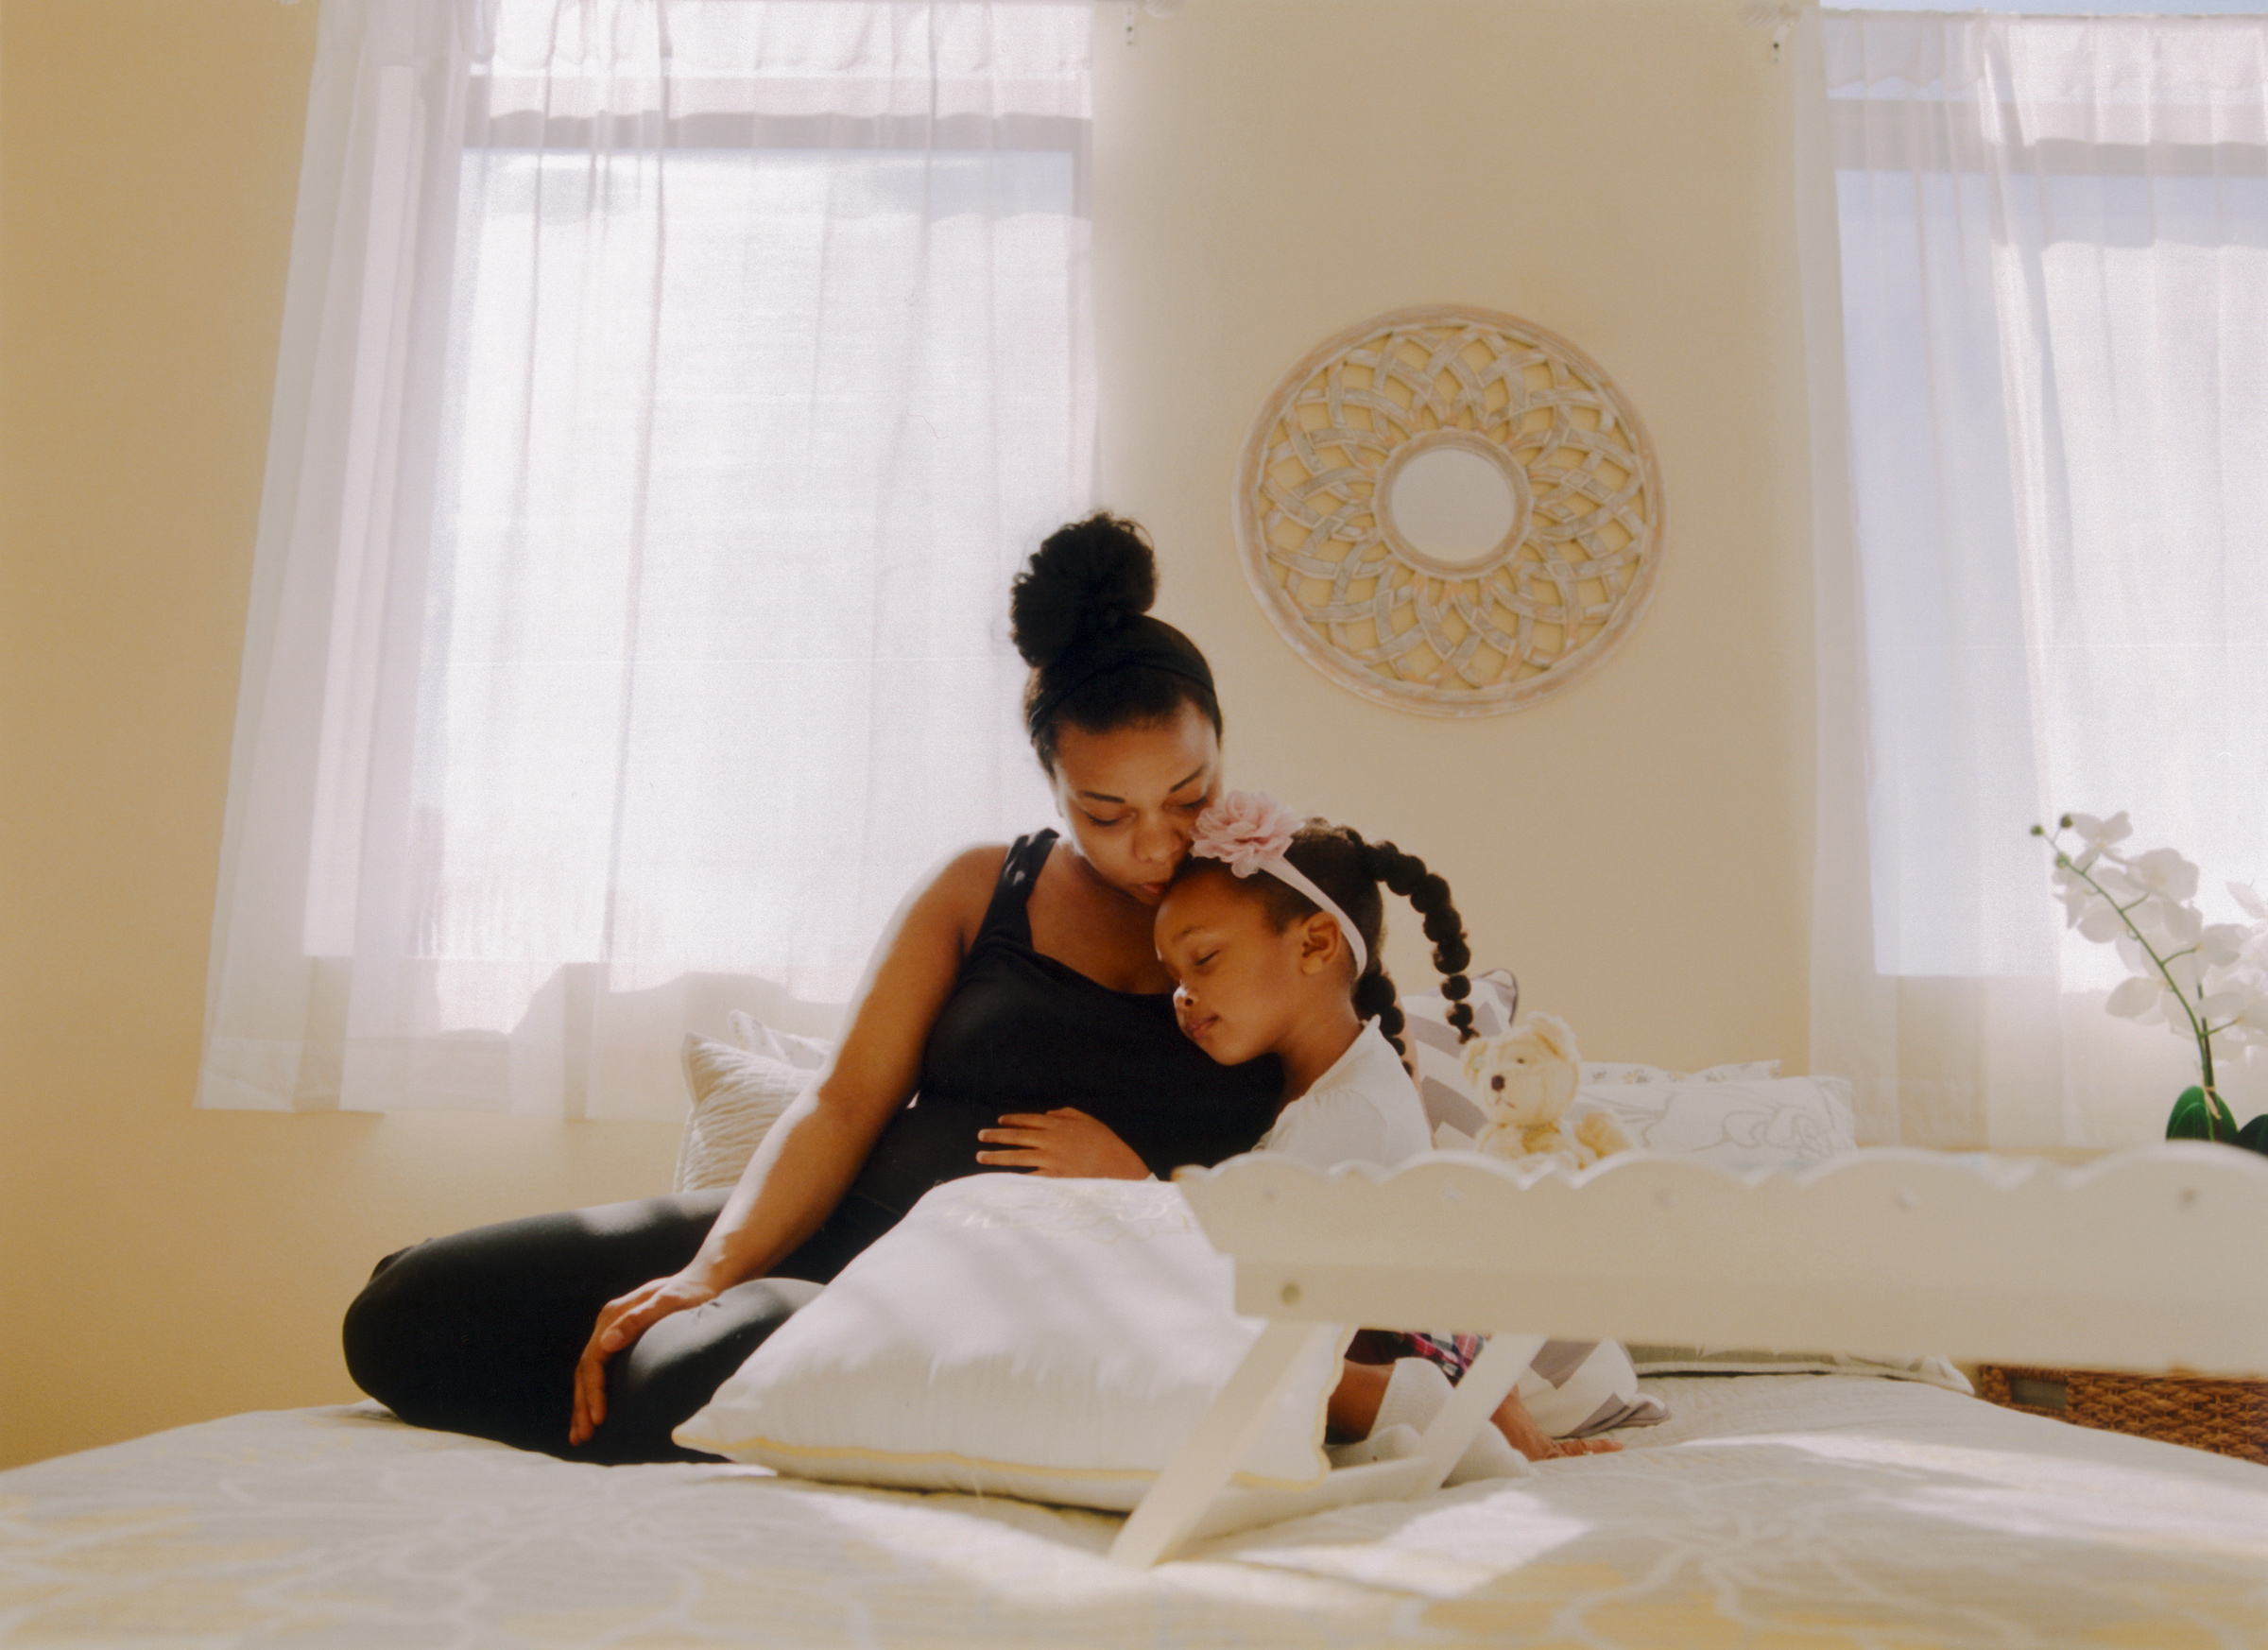 <strong>Amanda Drummond and her children.</strong> "<a href="https://time.com/collection/women-of-the-year/6150545/jennie-joseph/">Jennie Joseph Wants to Fix the Black Maternal Mortality Crisis One Midwife at a Time</a>," March 14 issue. (Myesha Evon Gardner for TIME)